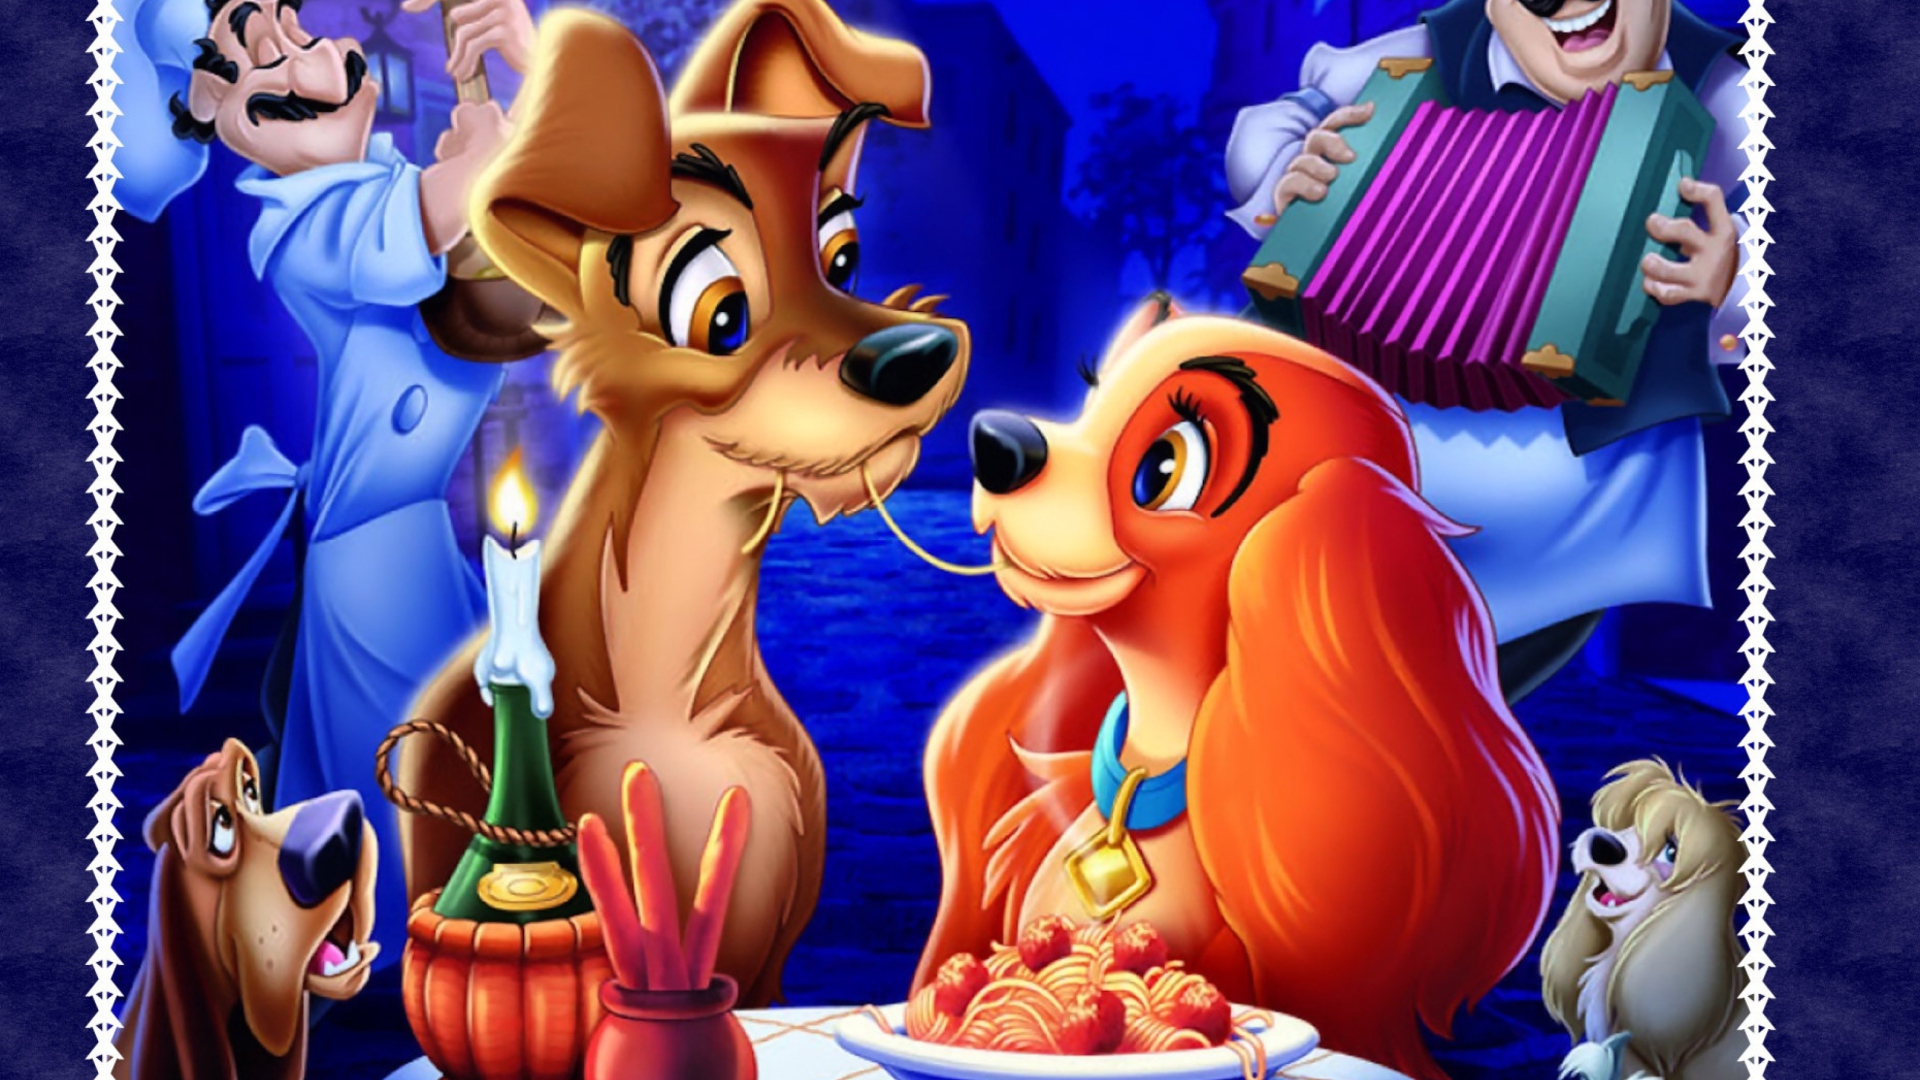 Lady And The Tramp wallpaper 1920x1080